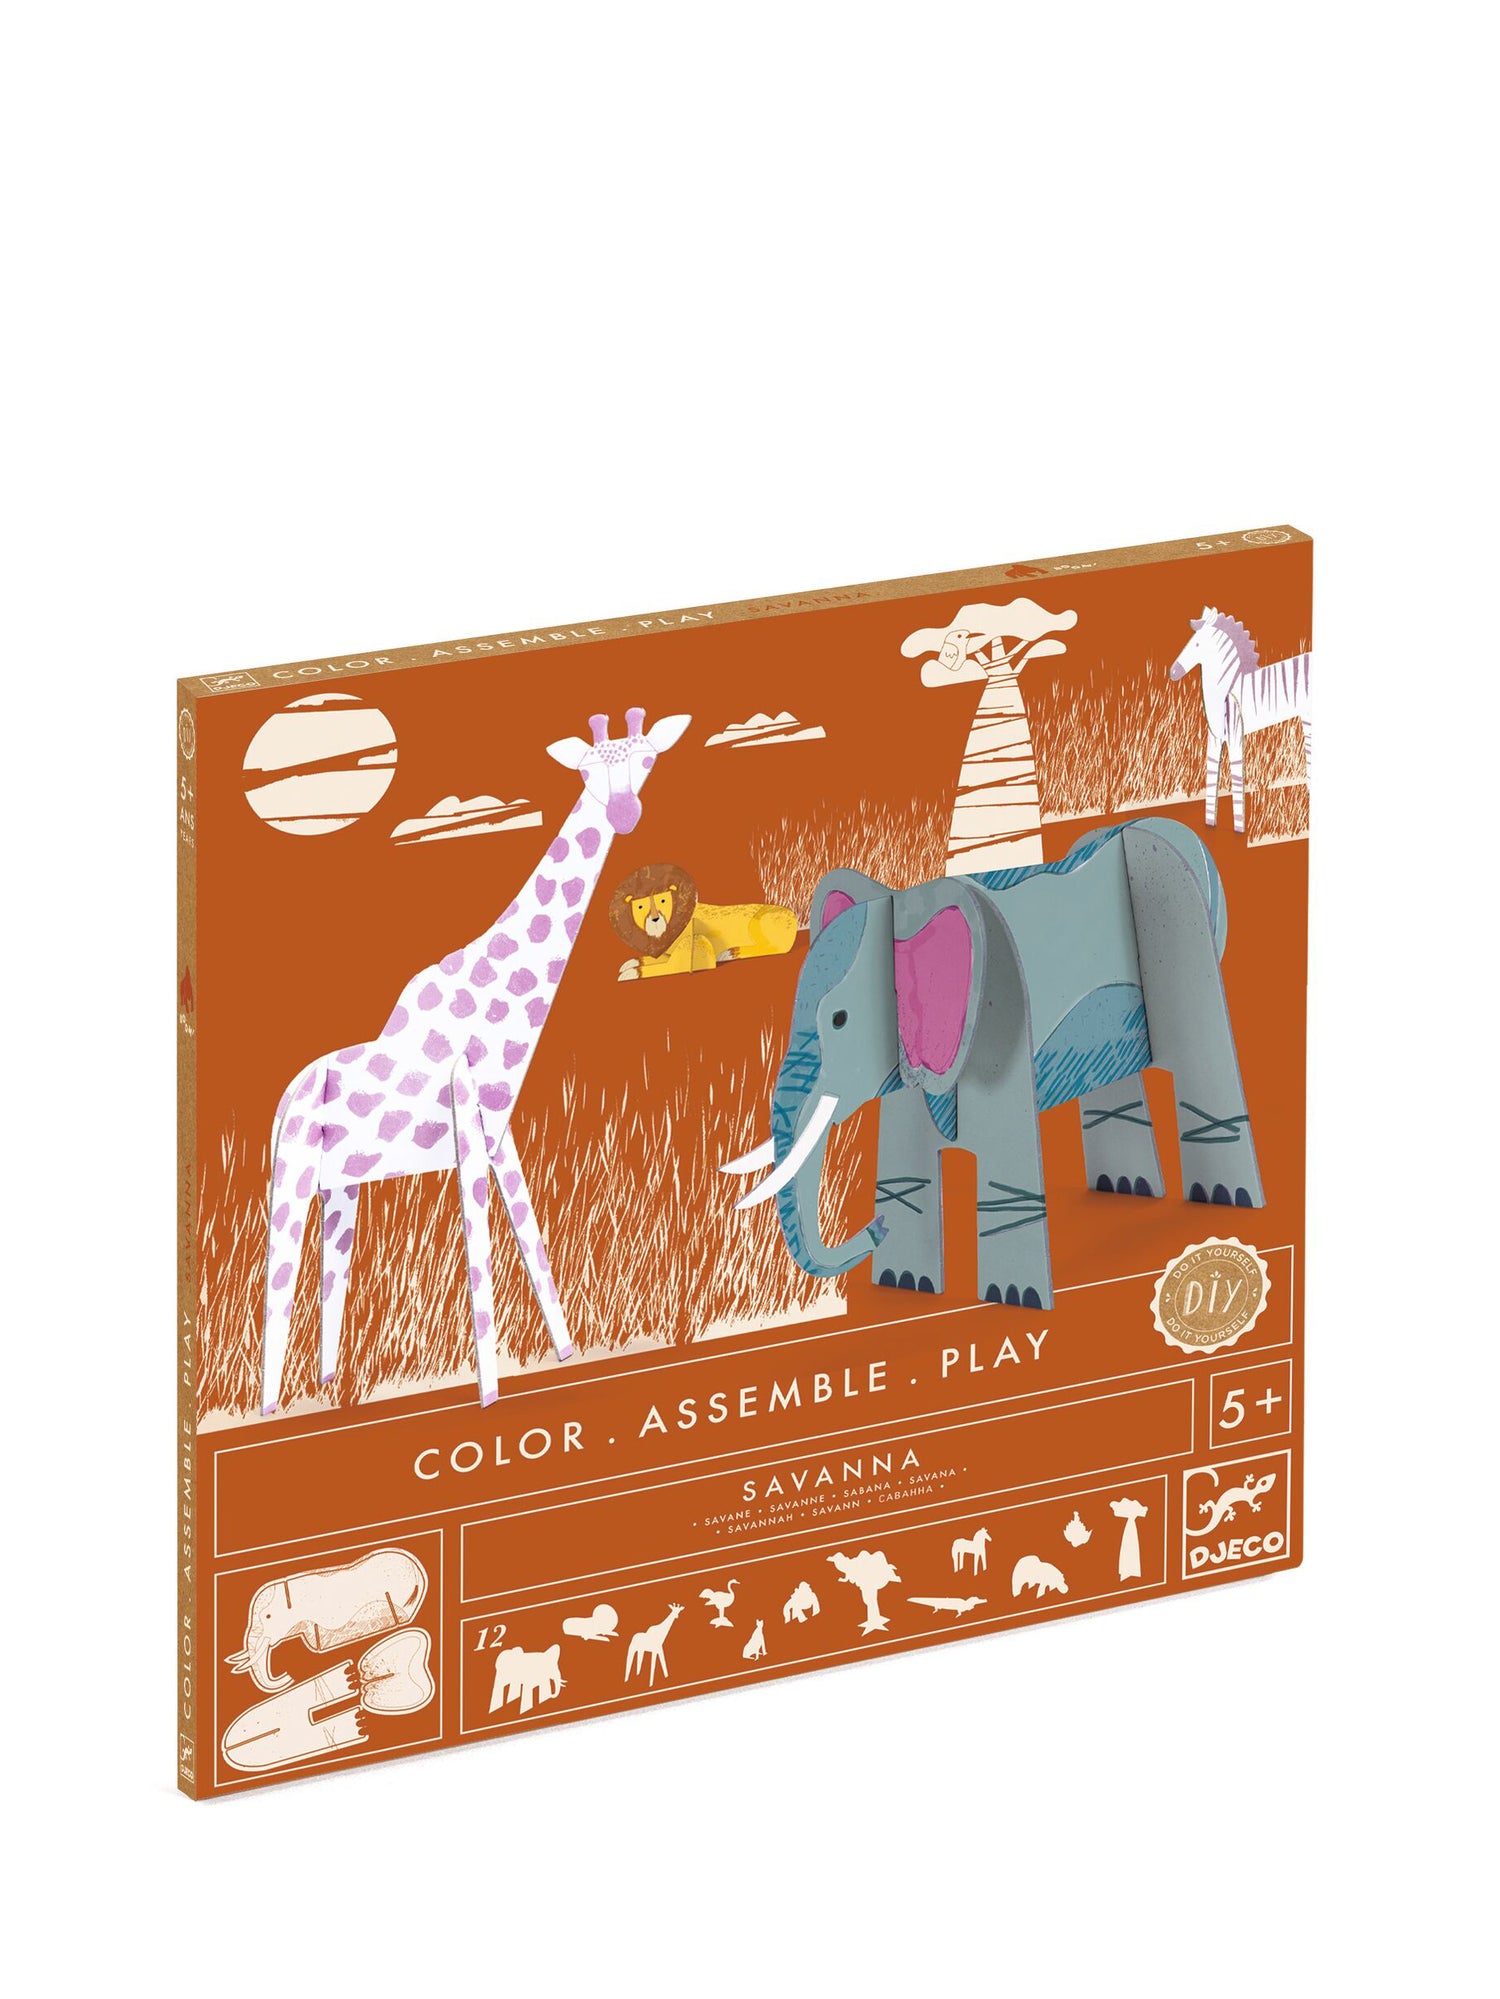 Savanna animals to color, assemble & play